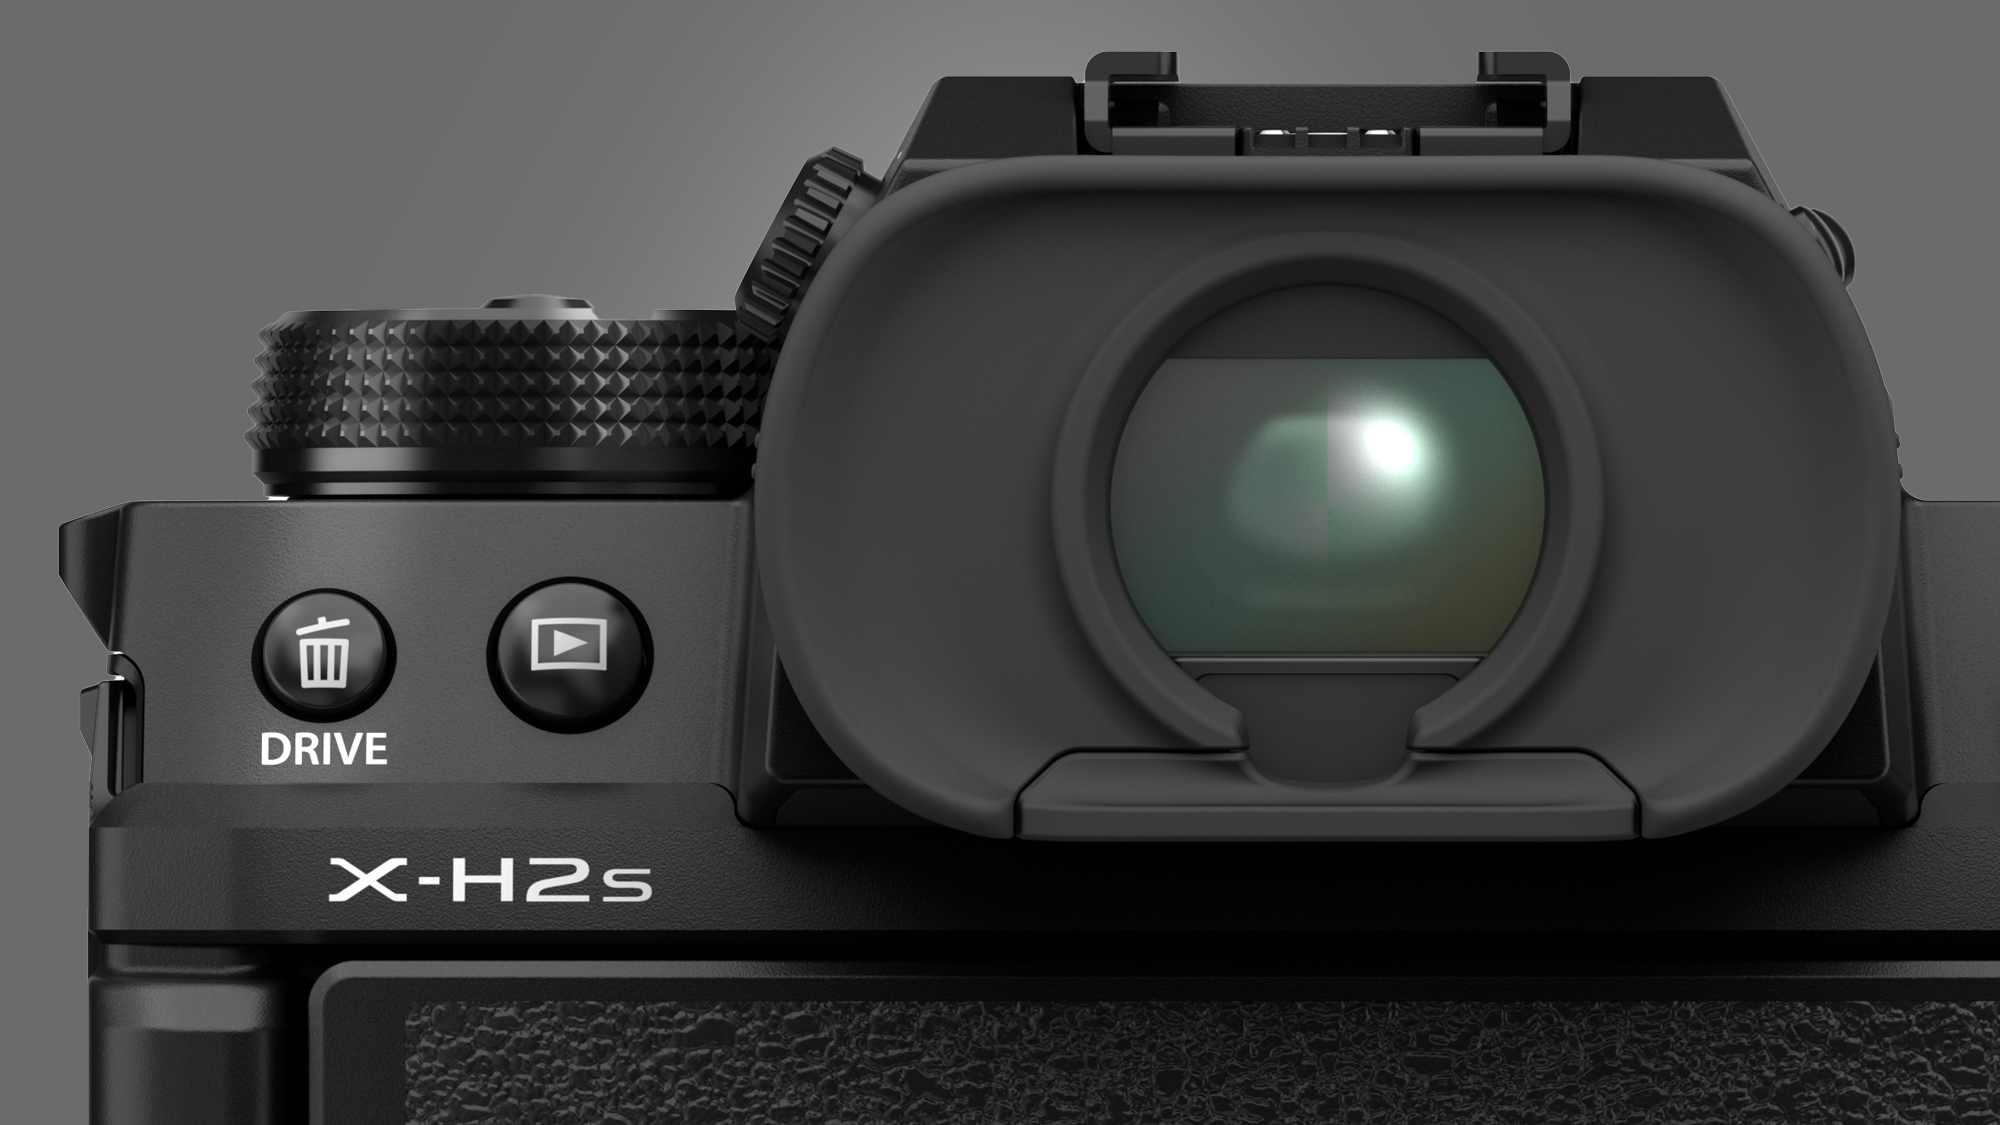 The viewfinder of the Fujifilm X-H2S camera